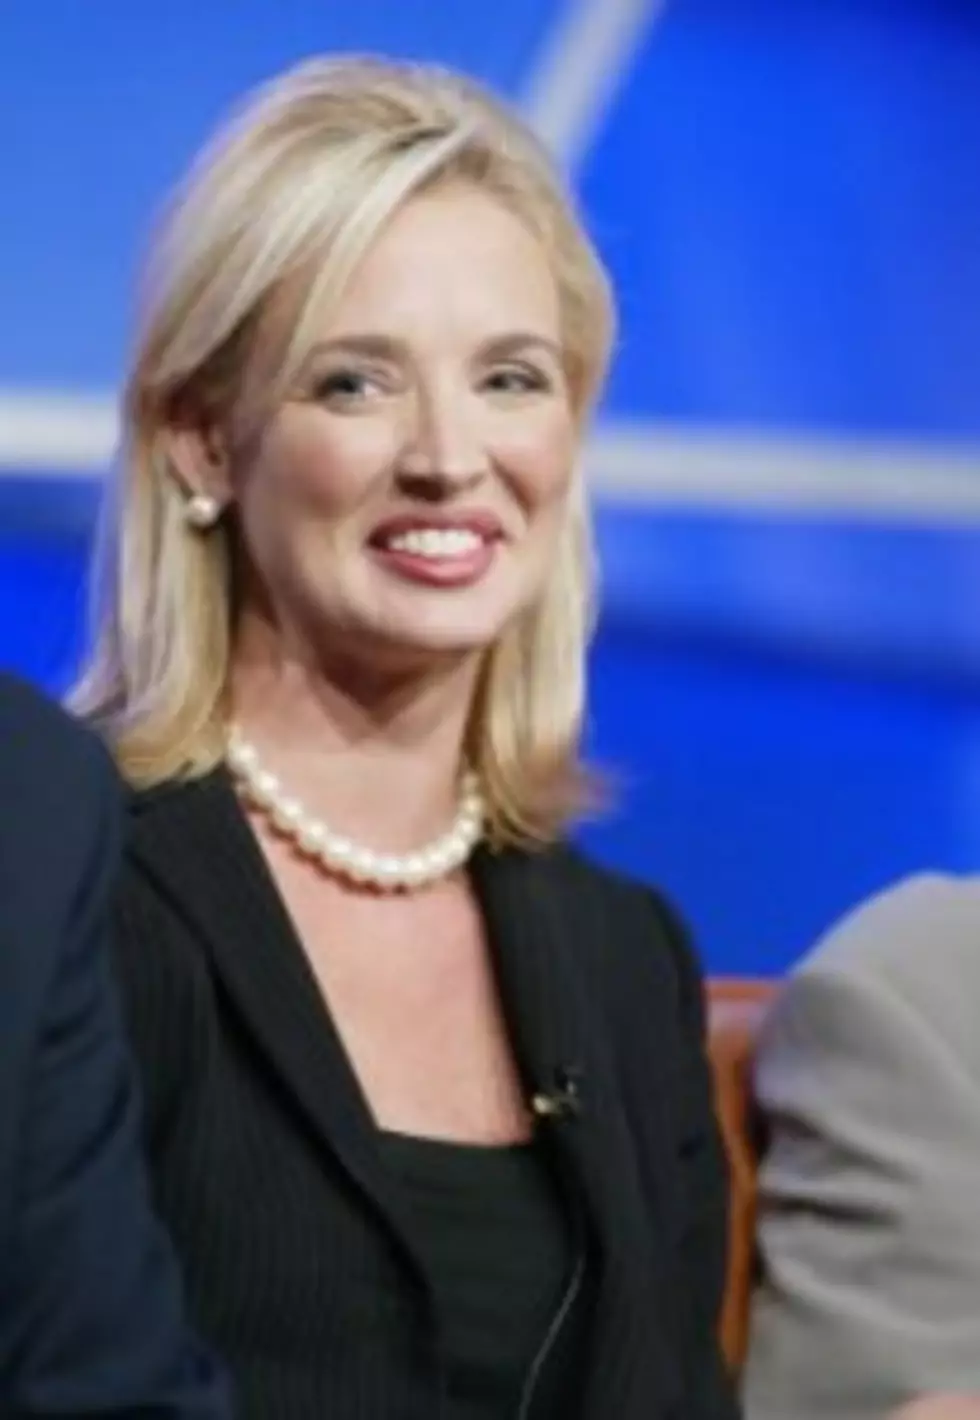 Laurie Dhue, Former Fox News Anchor, To Speak at Symposium Banquet. Exclusive Interview On The Buzz!